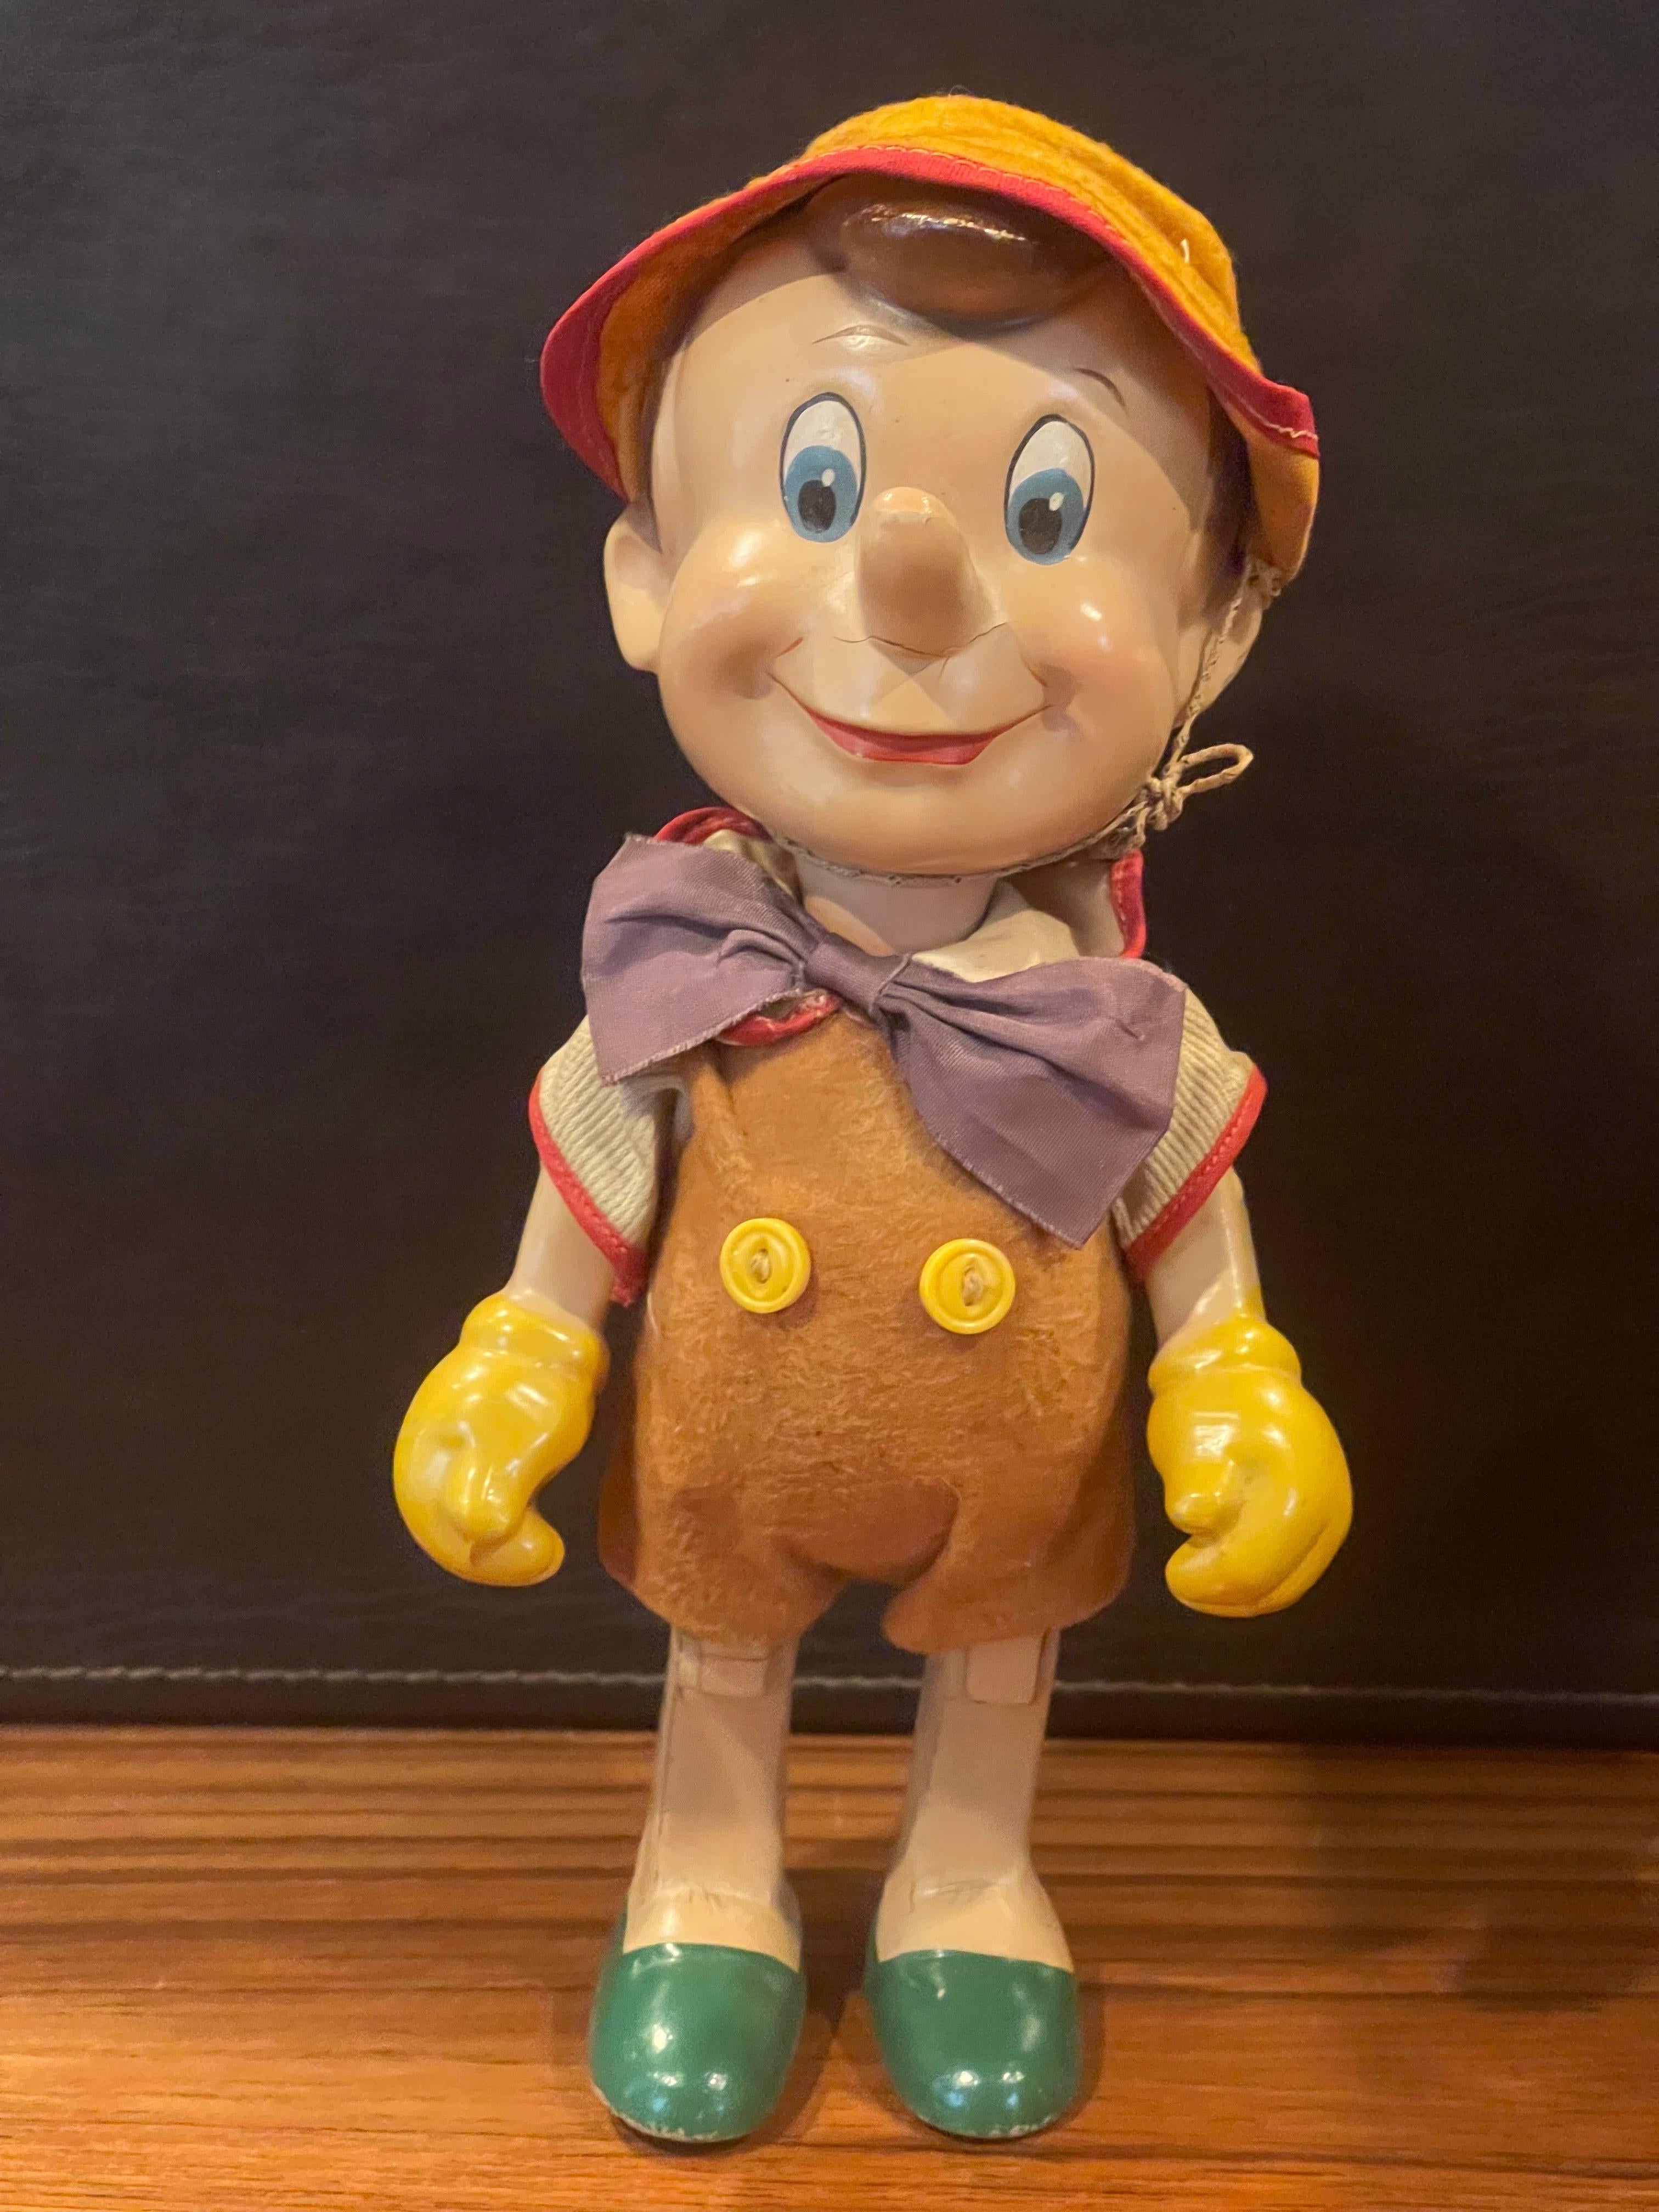 Fabric Antique Pinocchio Doll by Knickerbocker Toy Co. For Sale